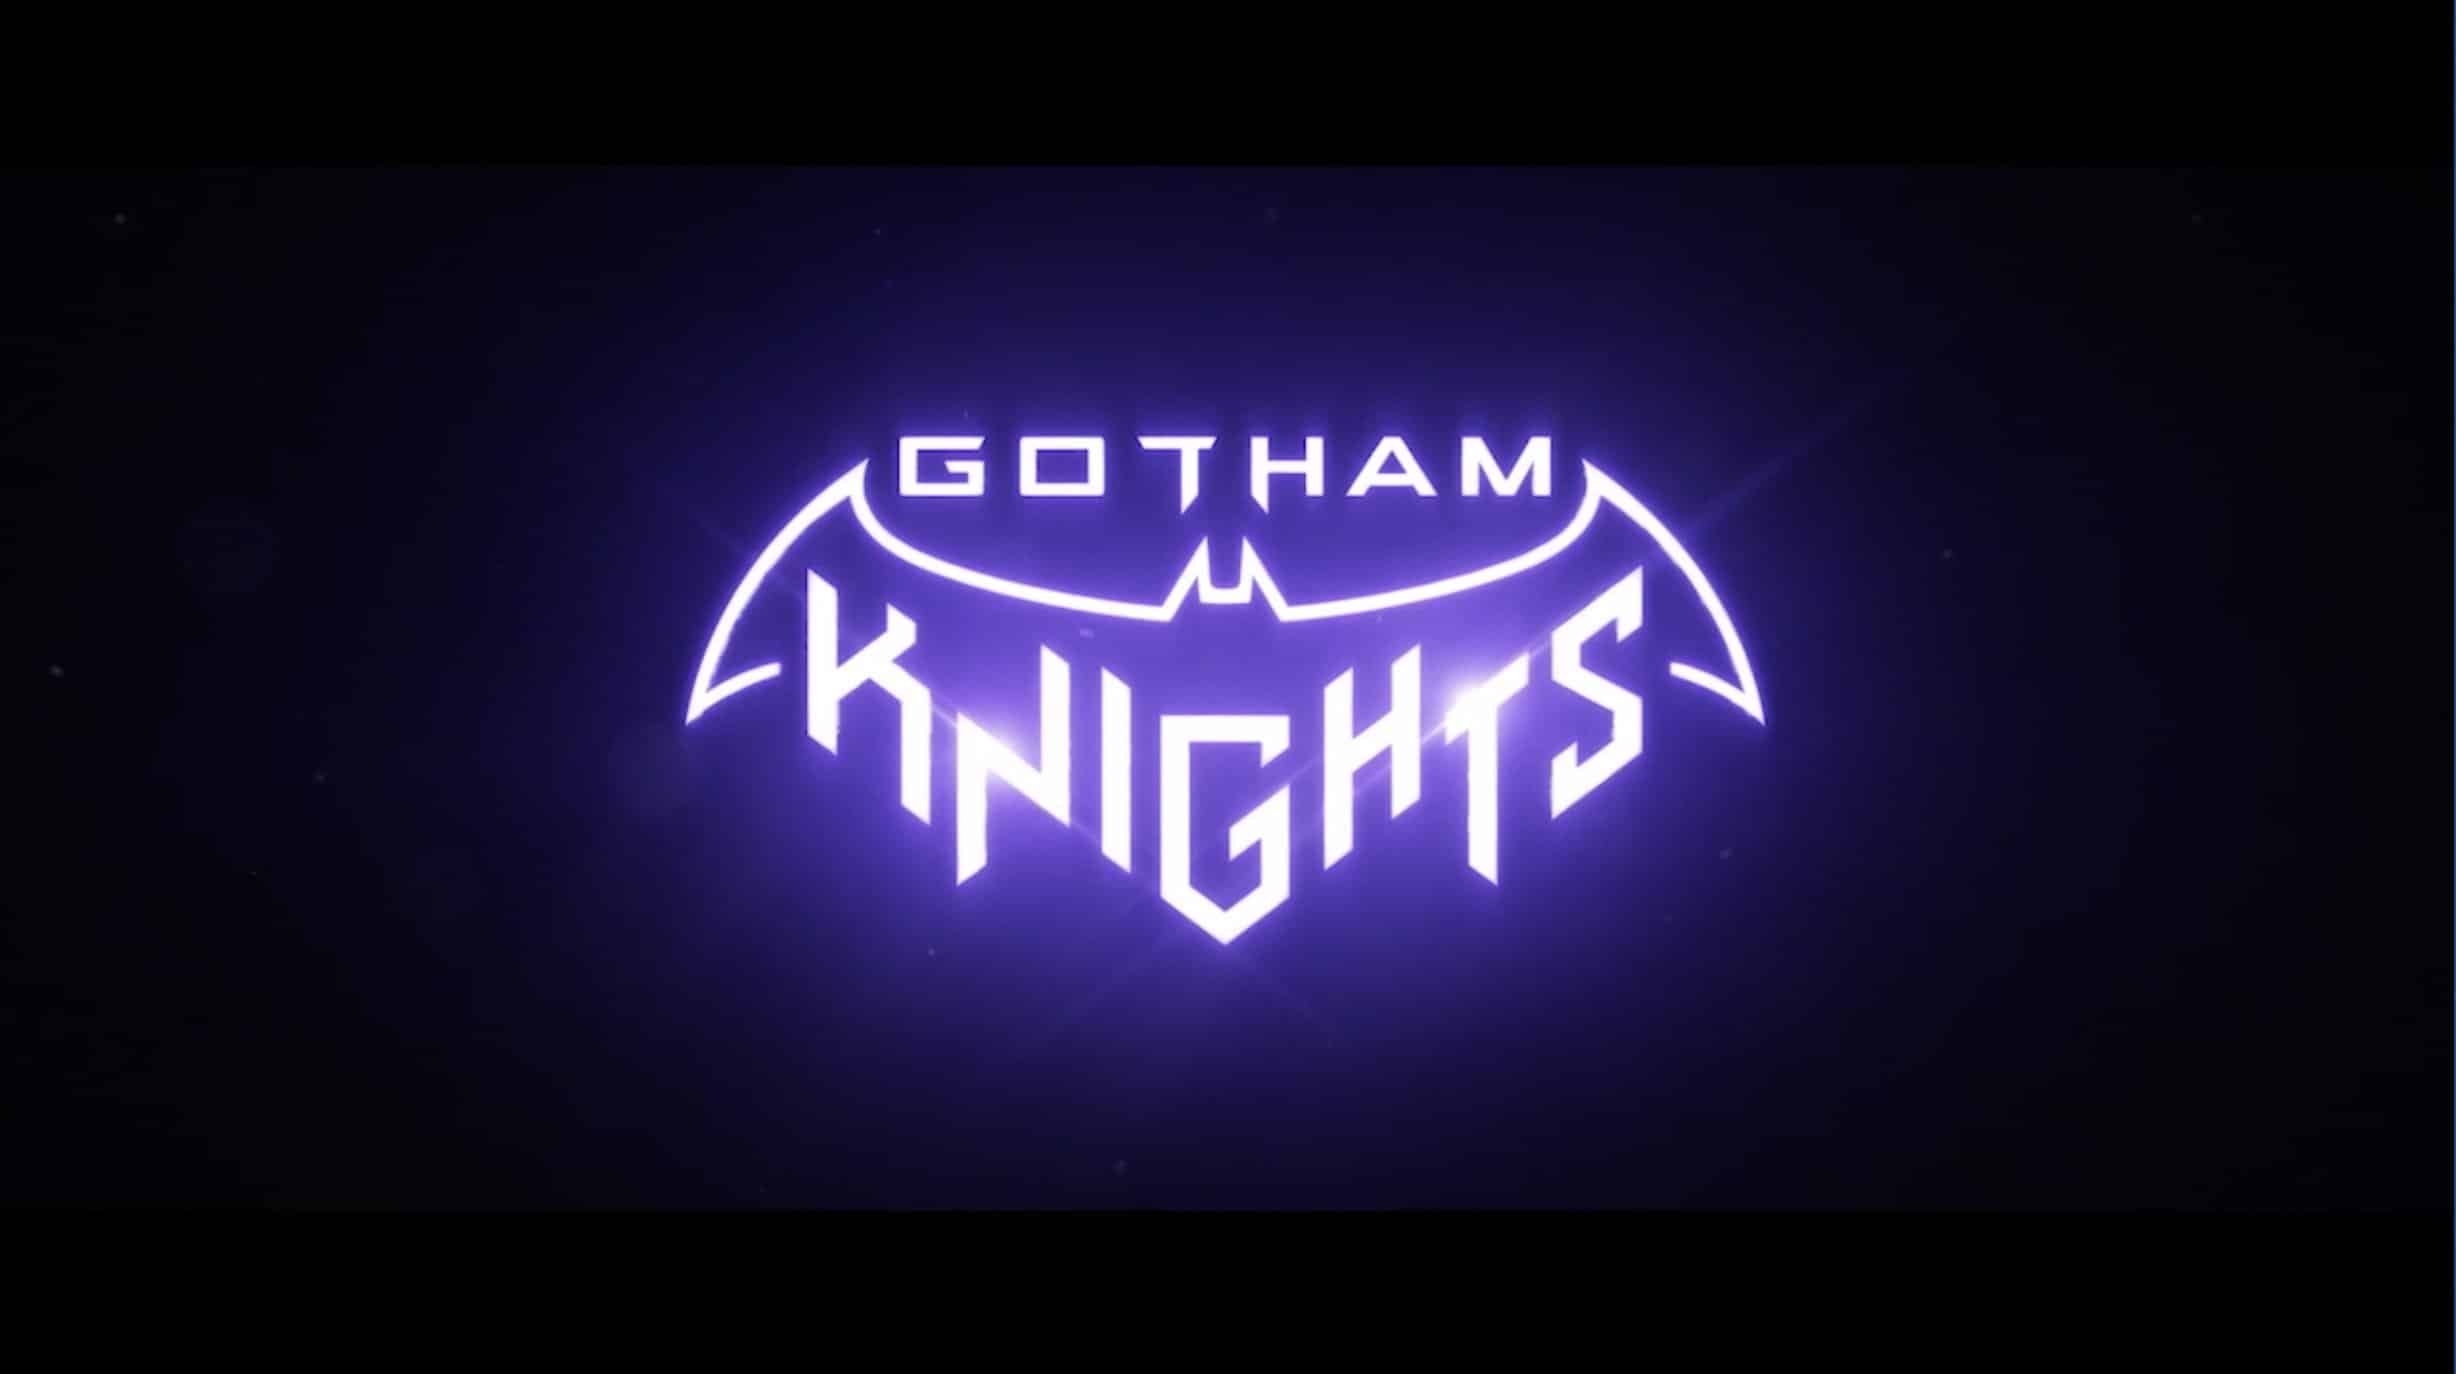 Gotham Knights is a Co-Op Batman Game With Four Playable Characters